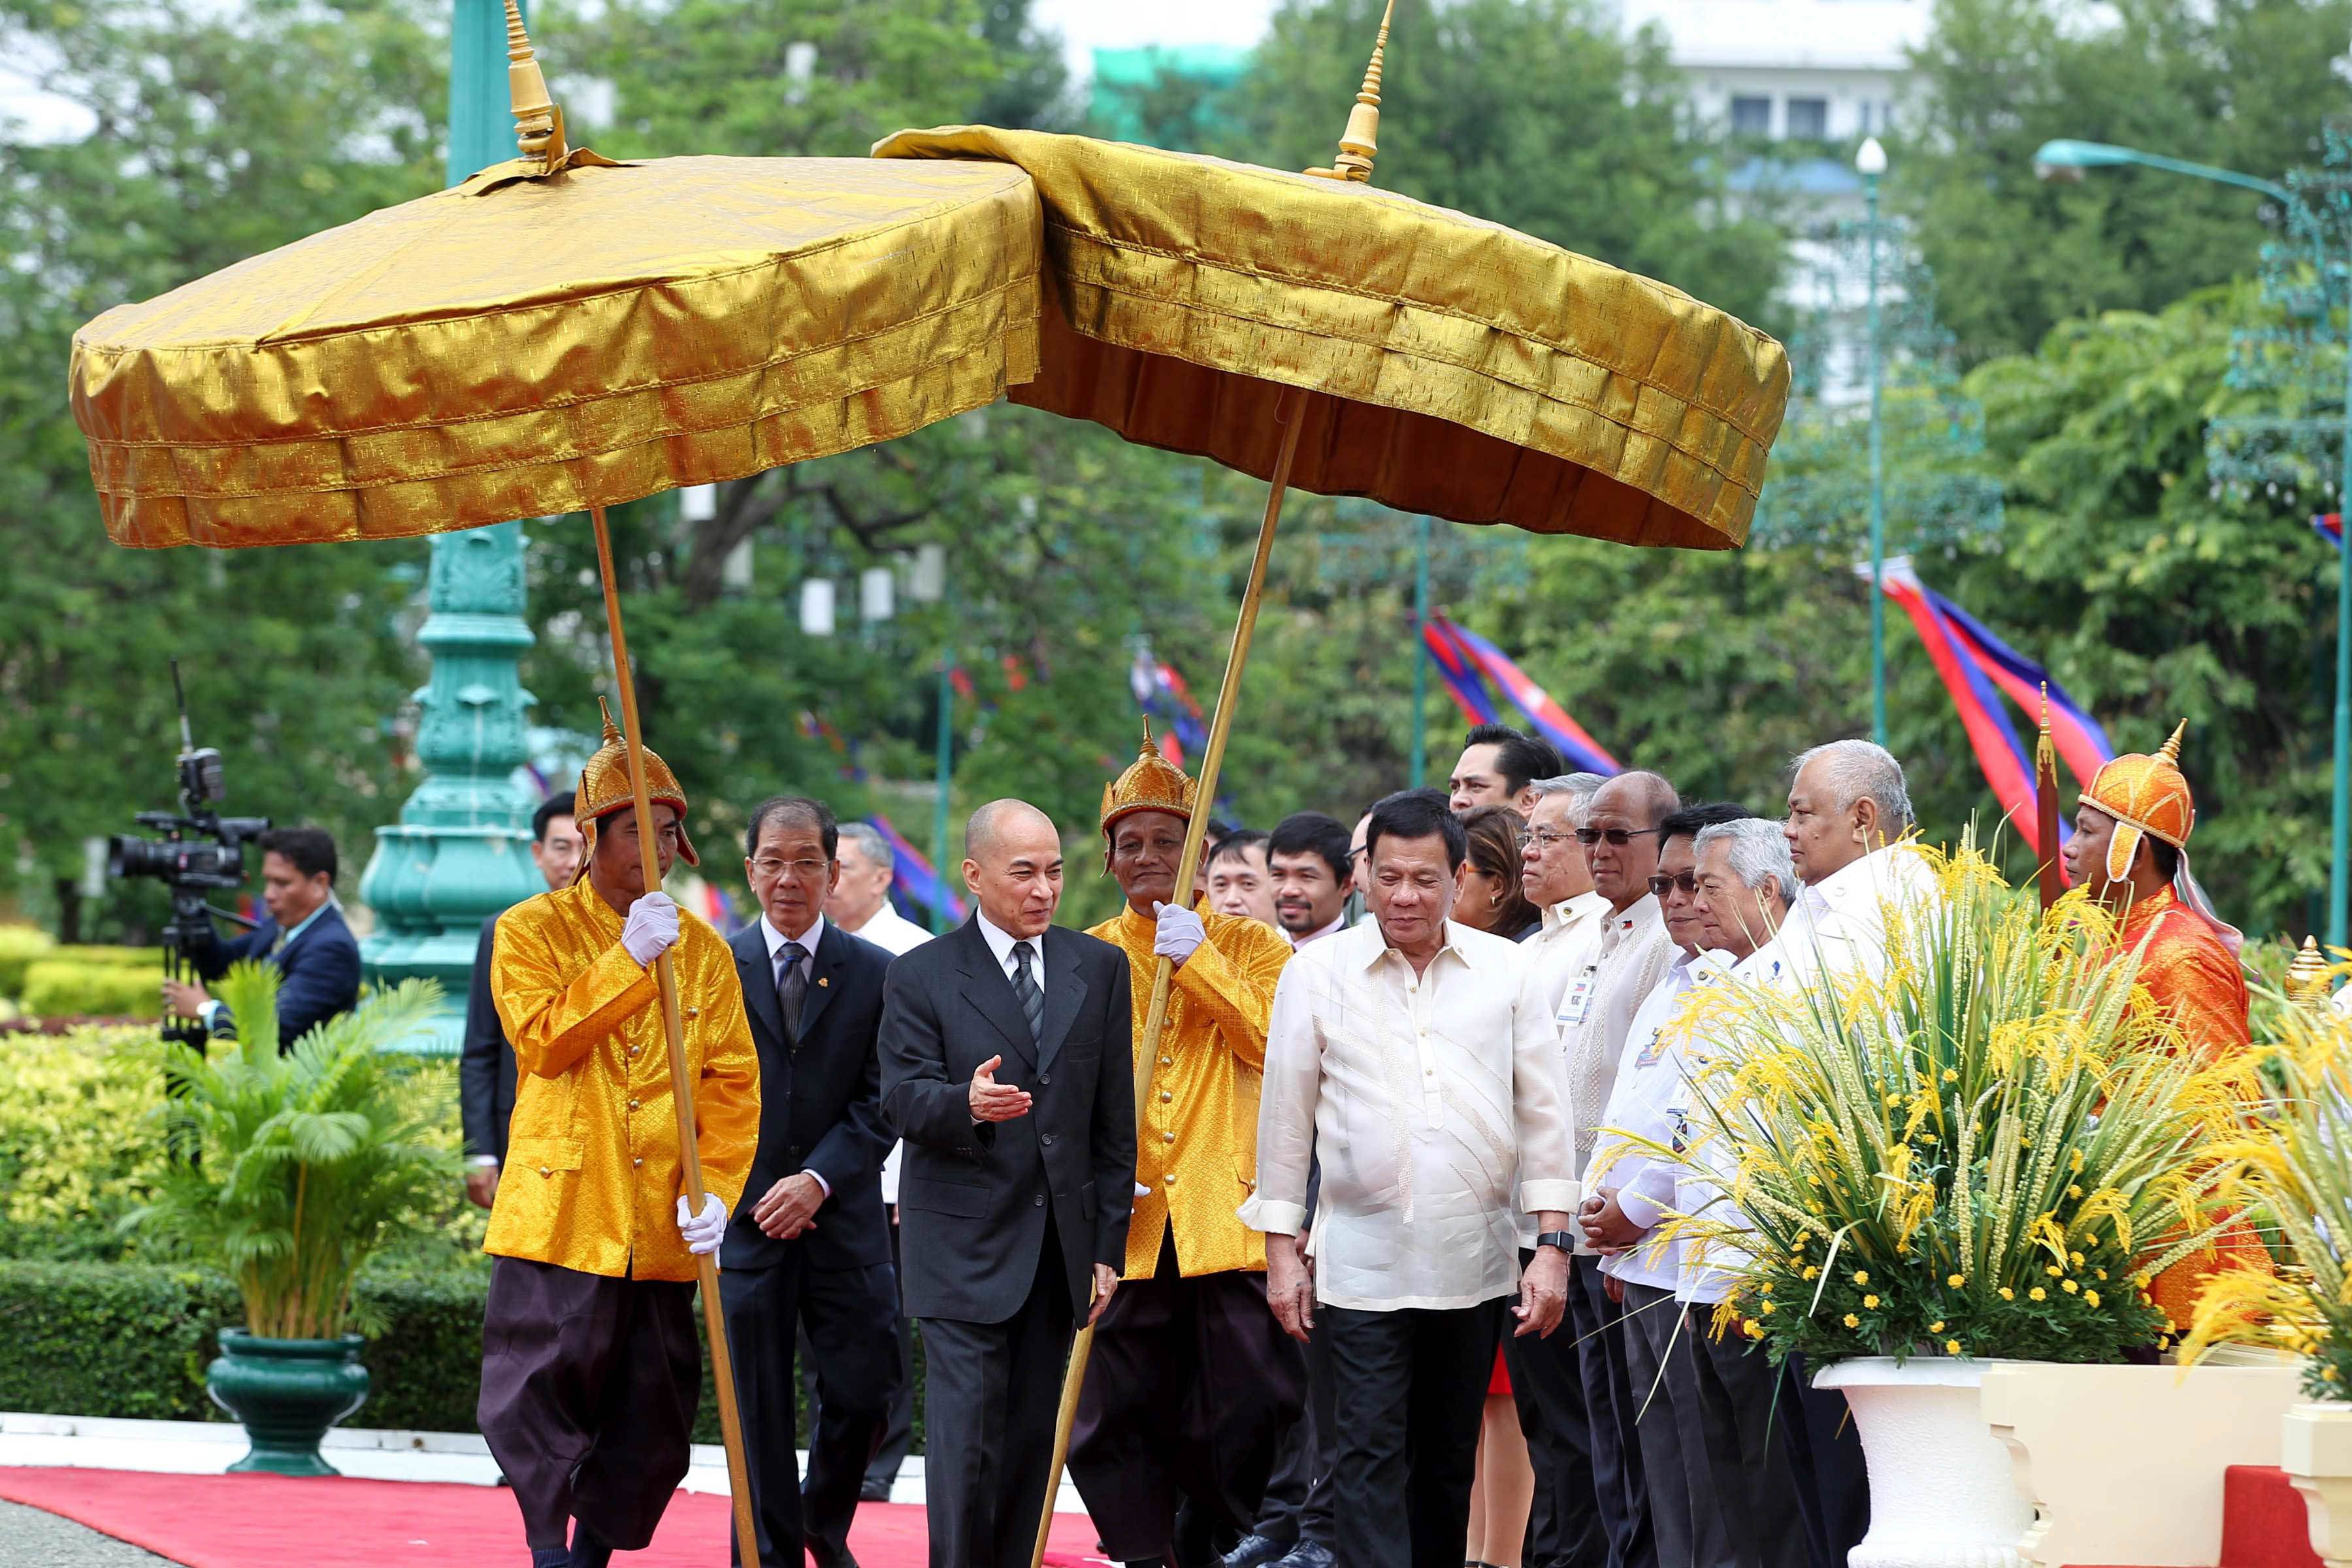 WITH A KING. President Duterte is welcomed by the King of Cambodia Norodom Sihamoni upon his arrival at the Royal Palace 